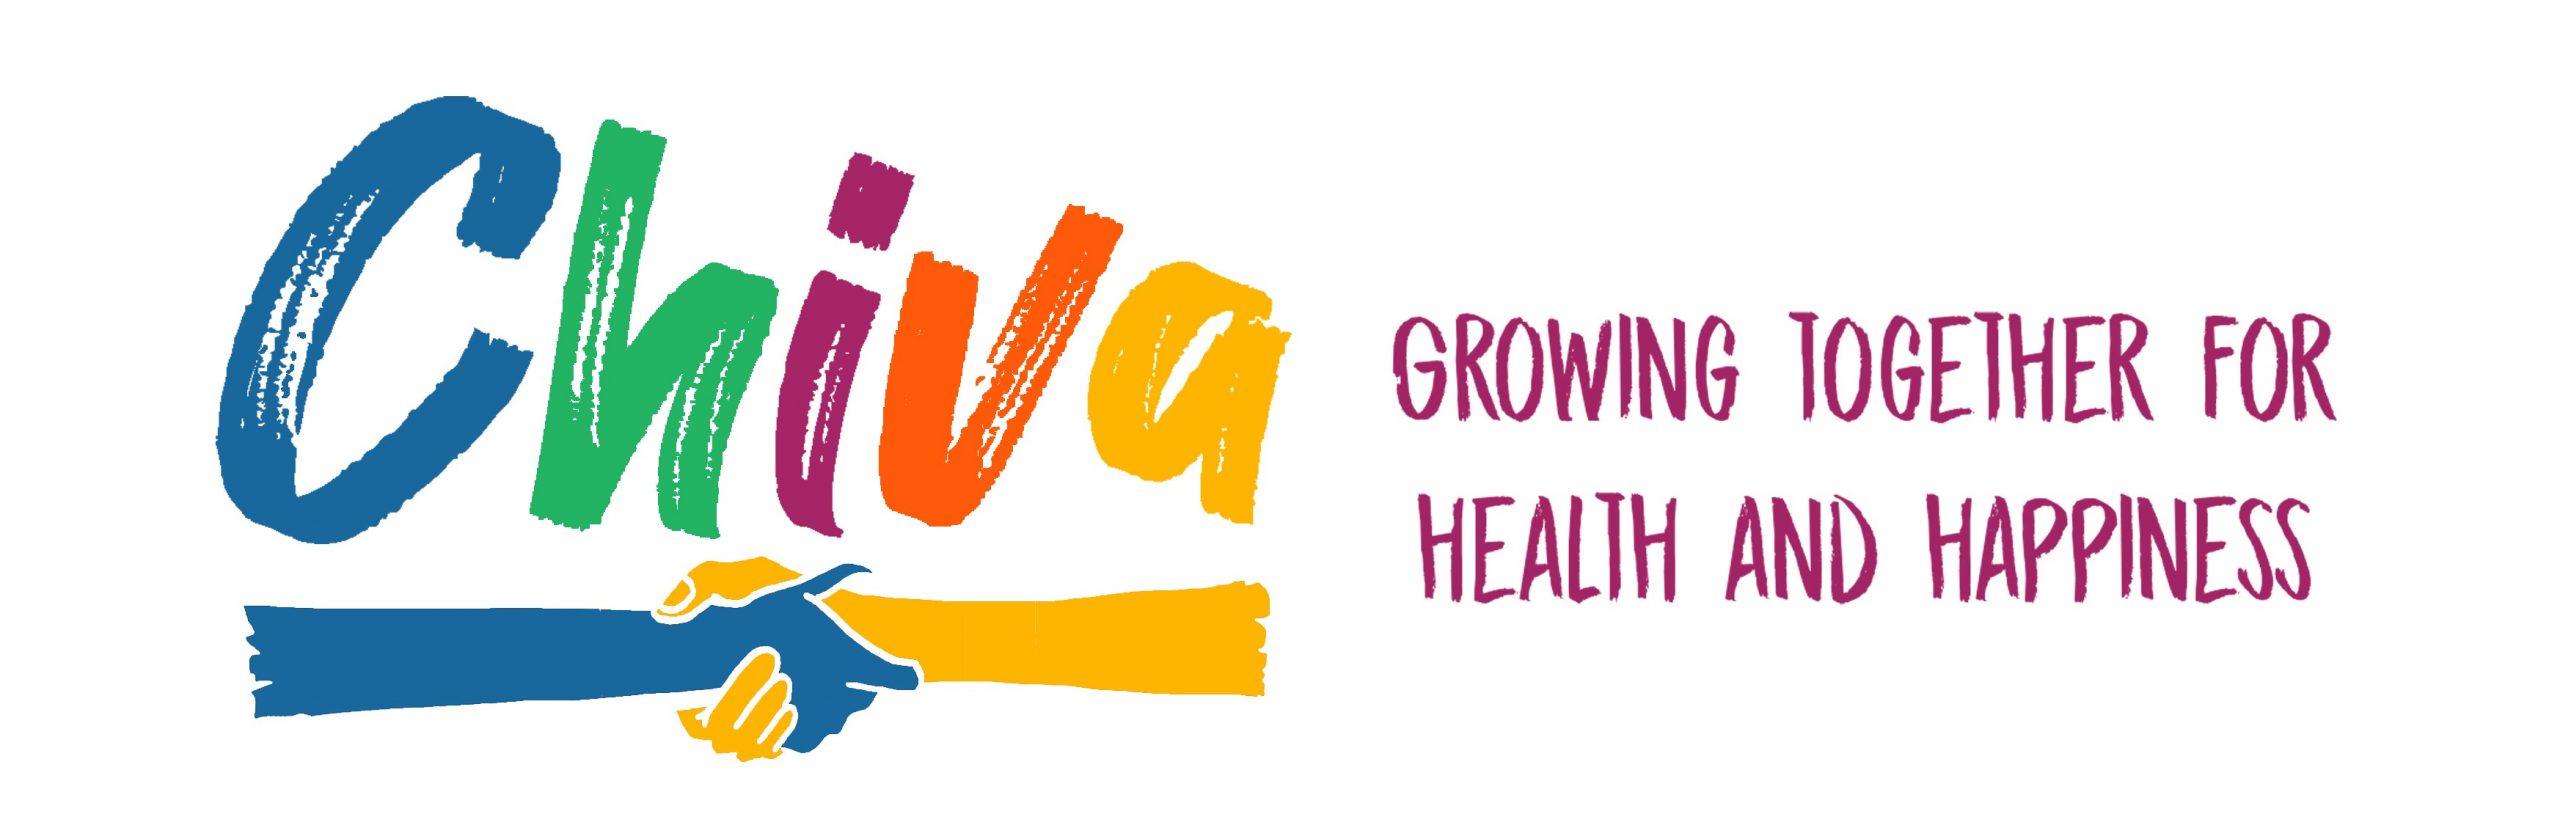 Thumbnail image for the blog post - New Chiva logo to mark our 20th anniversary as a charity